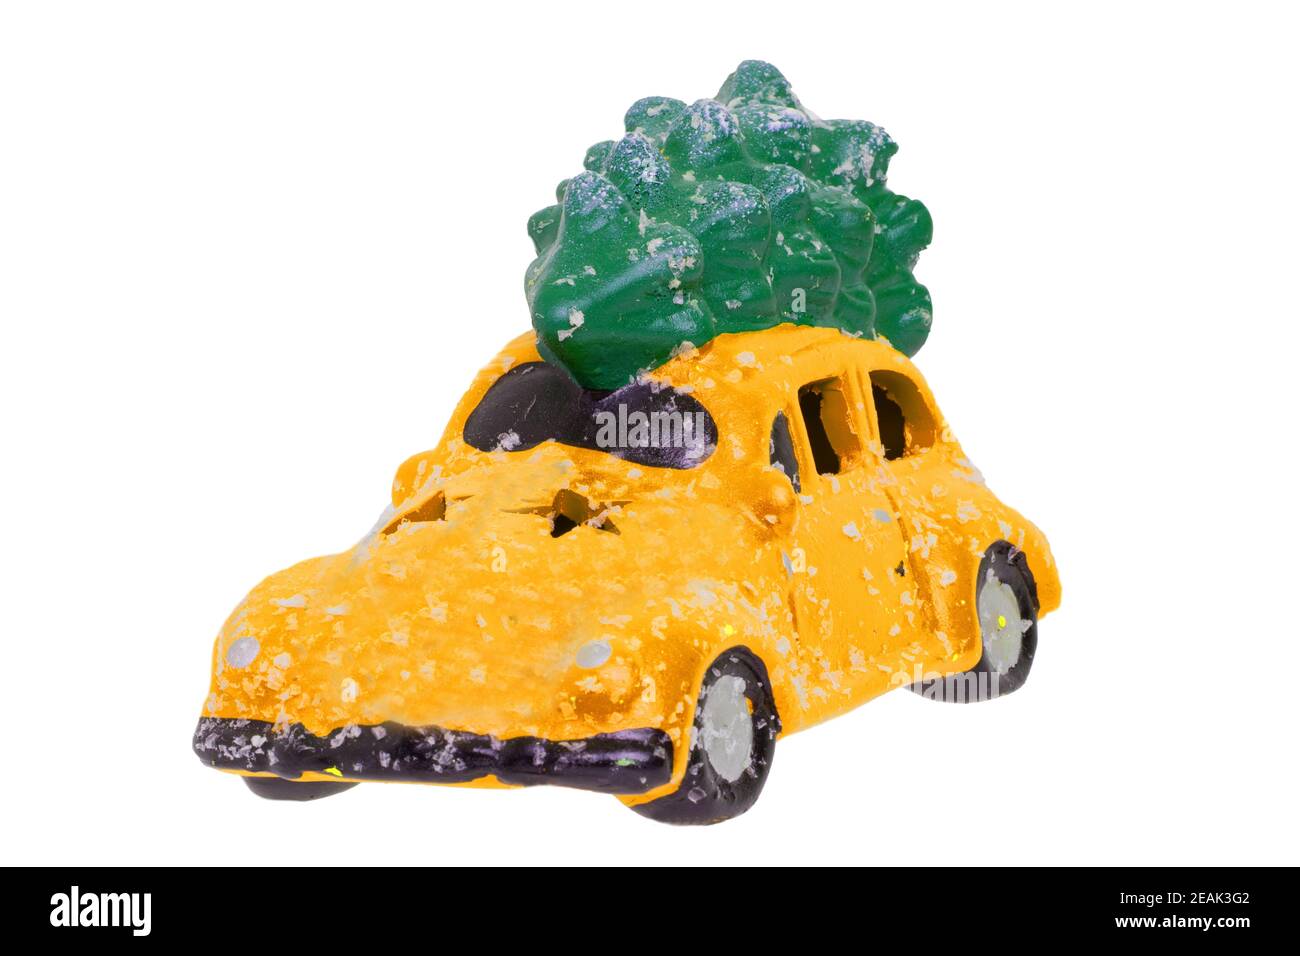 Christmas decorations background. Closeup of a snow-covered yellow car toy with green fir-tree on the roof isolated on a white background. Saisonal design element for cards or stickers. Macro. Stock Photo